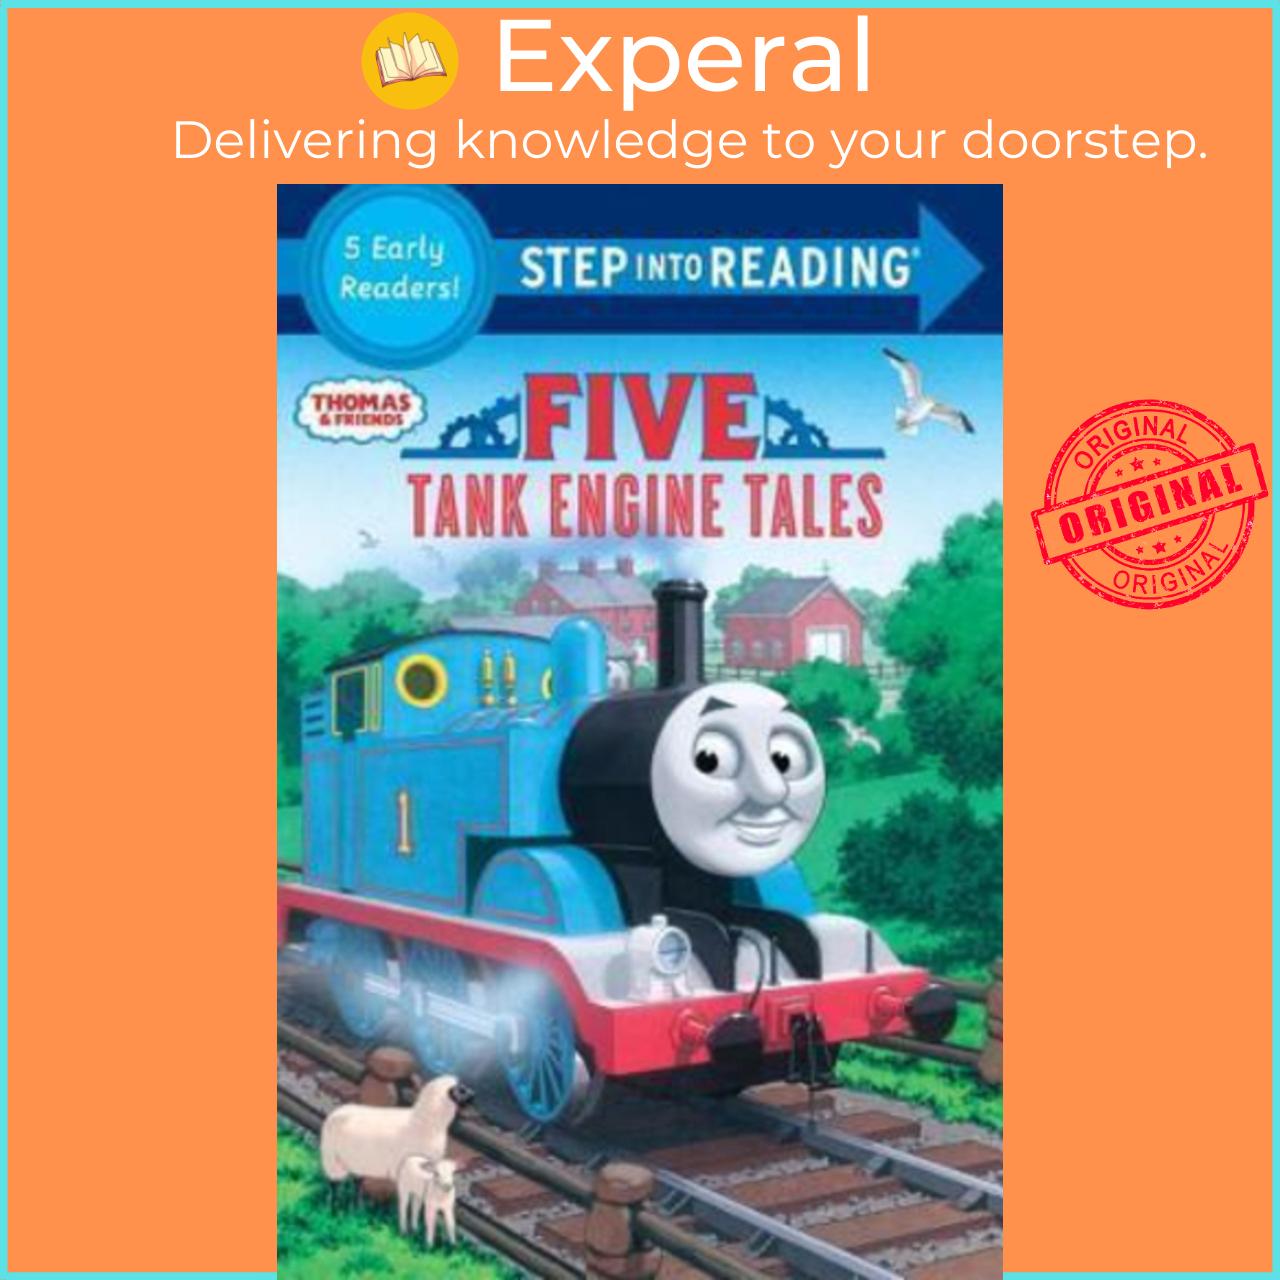 Sách - Five Tank Engine Tales (Thomas & Friends) by Random House (US edition, paperback)